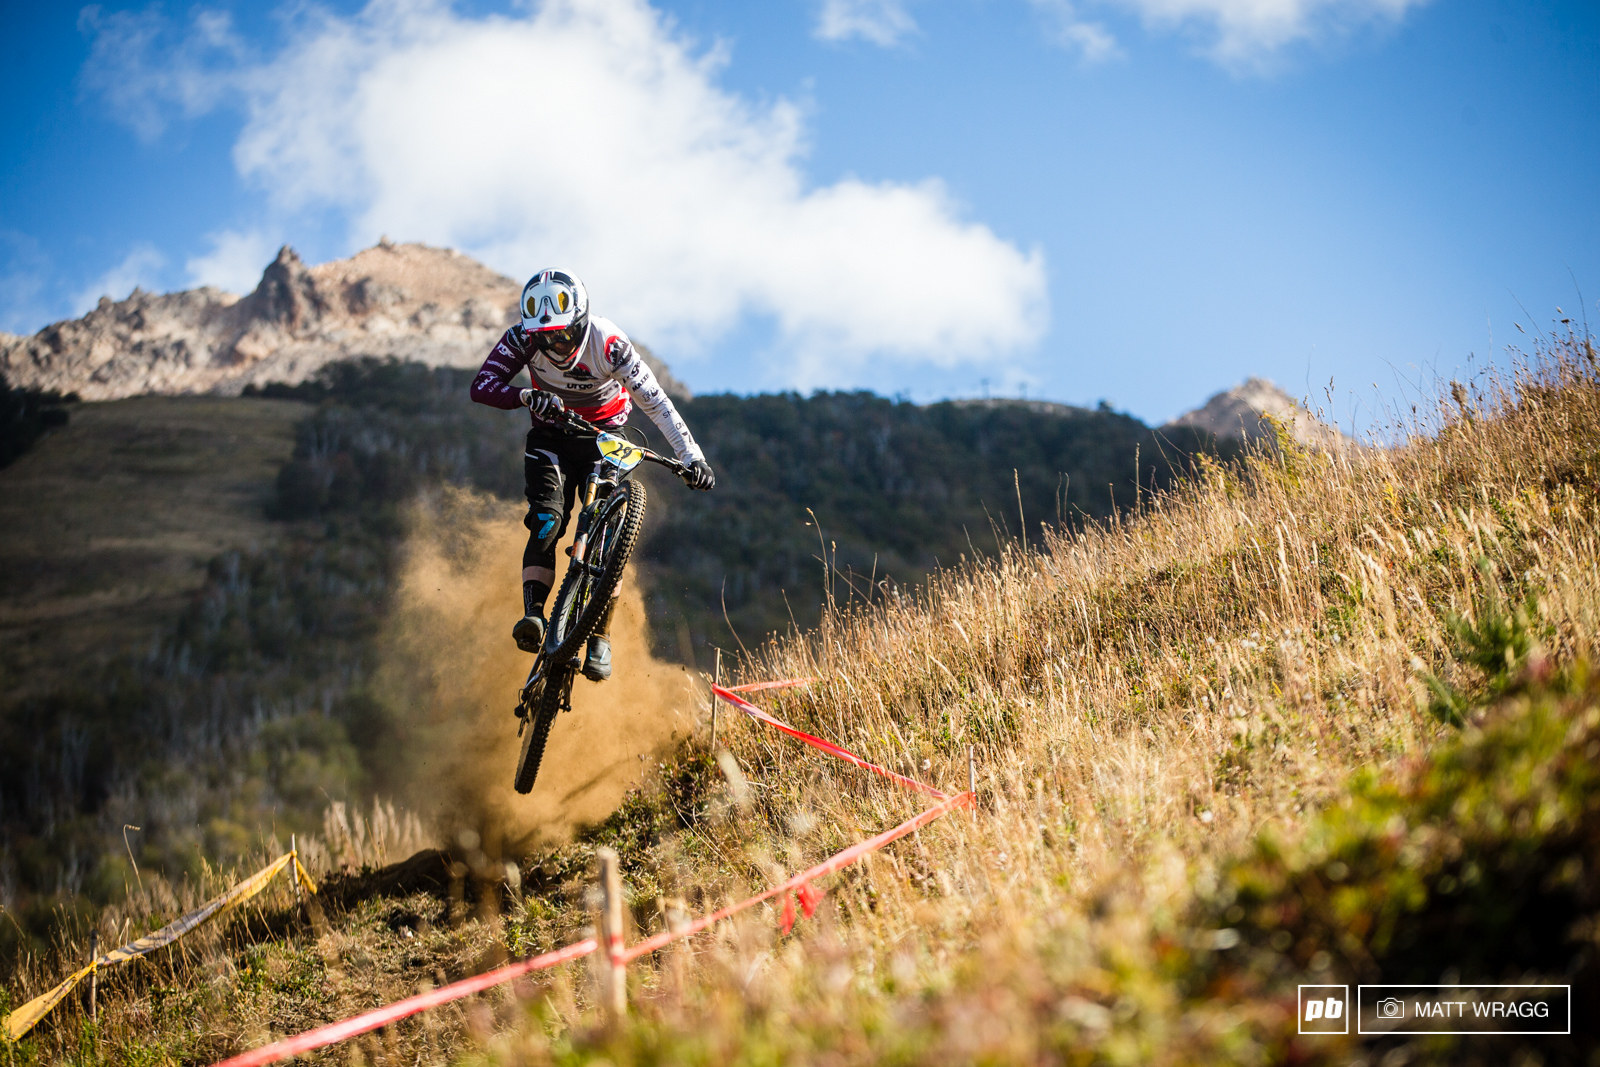 Remi Gauvin may be relatively new to enduro but he bagged a solid result last weekend and knows how to make these courses look good.